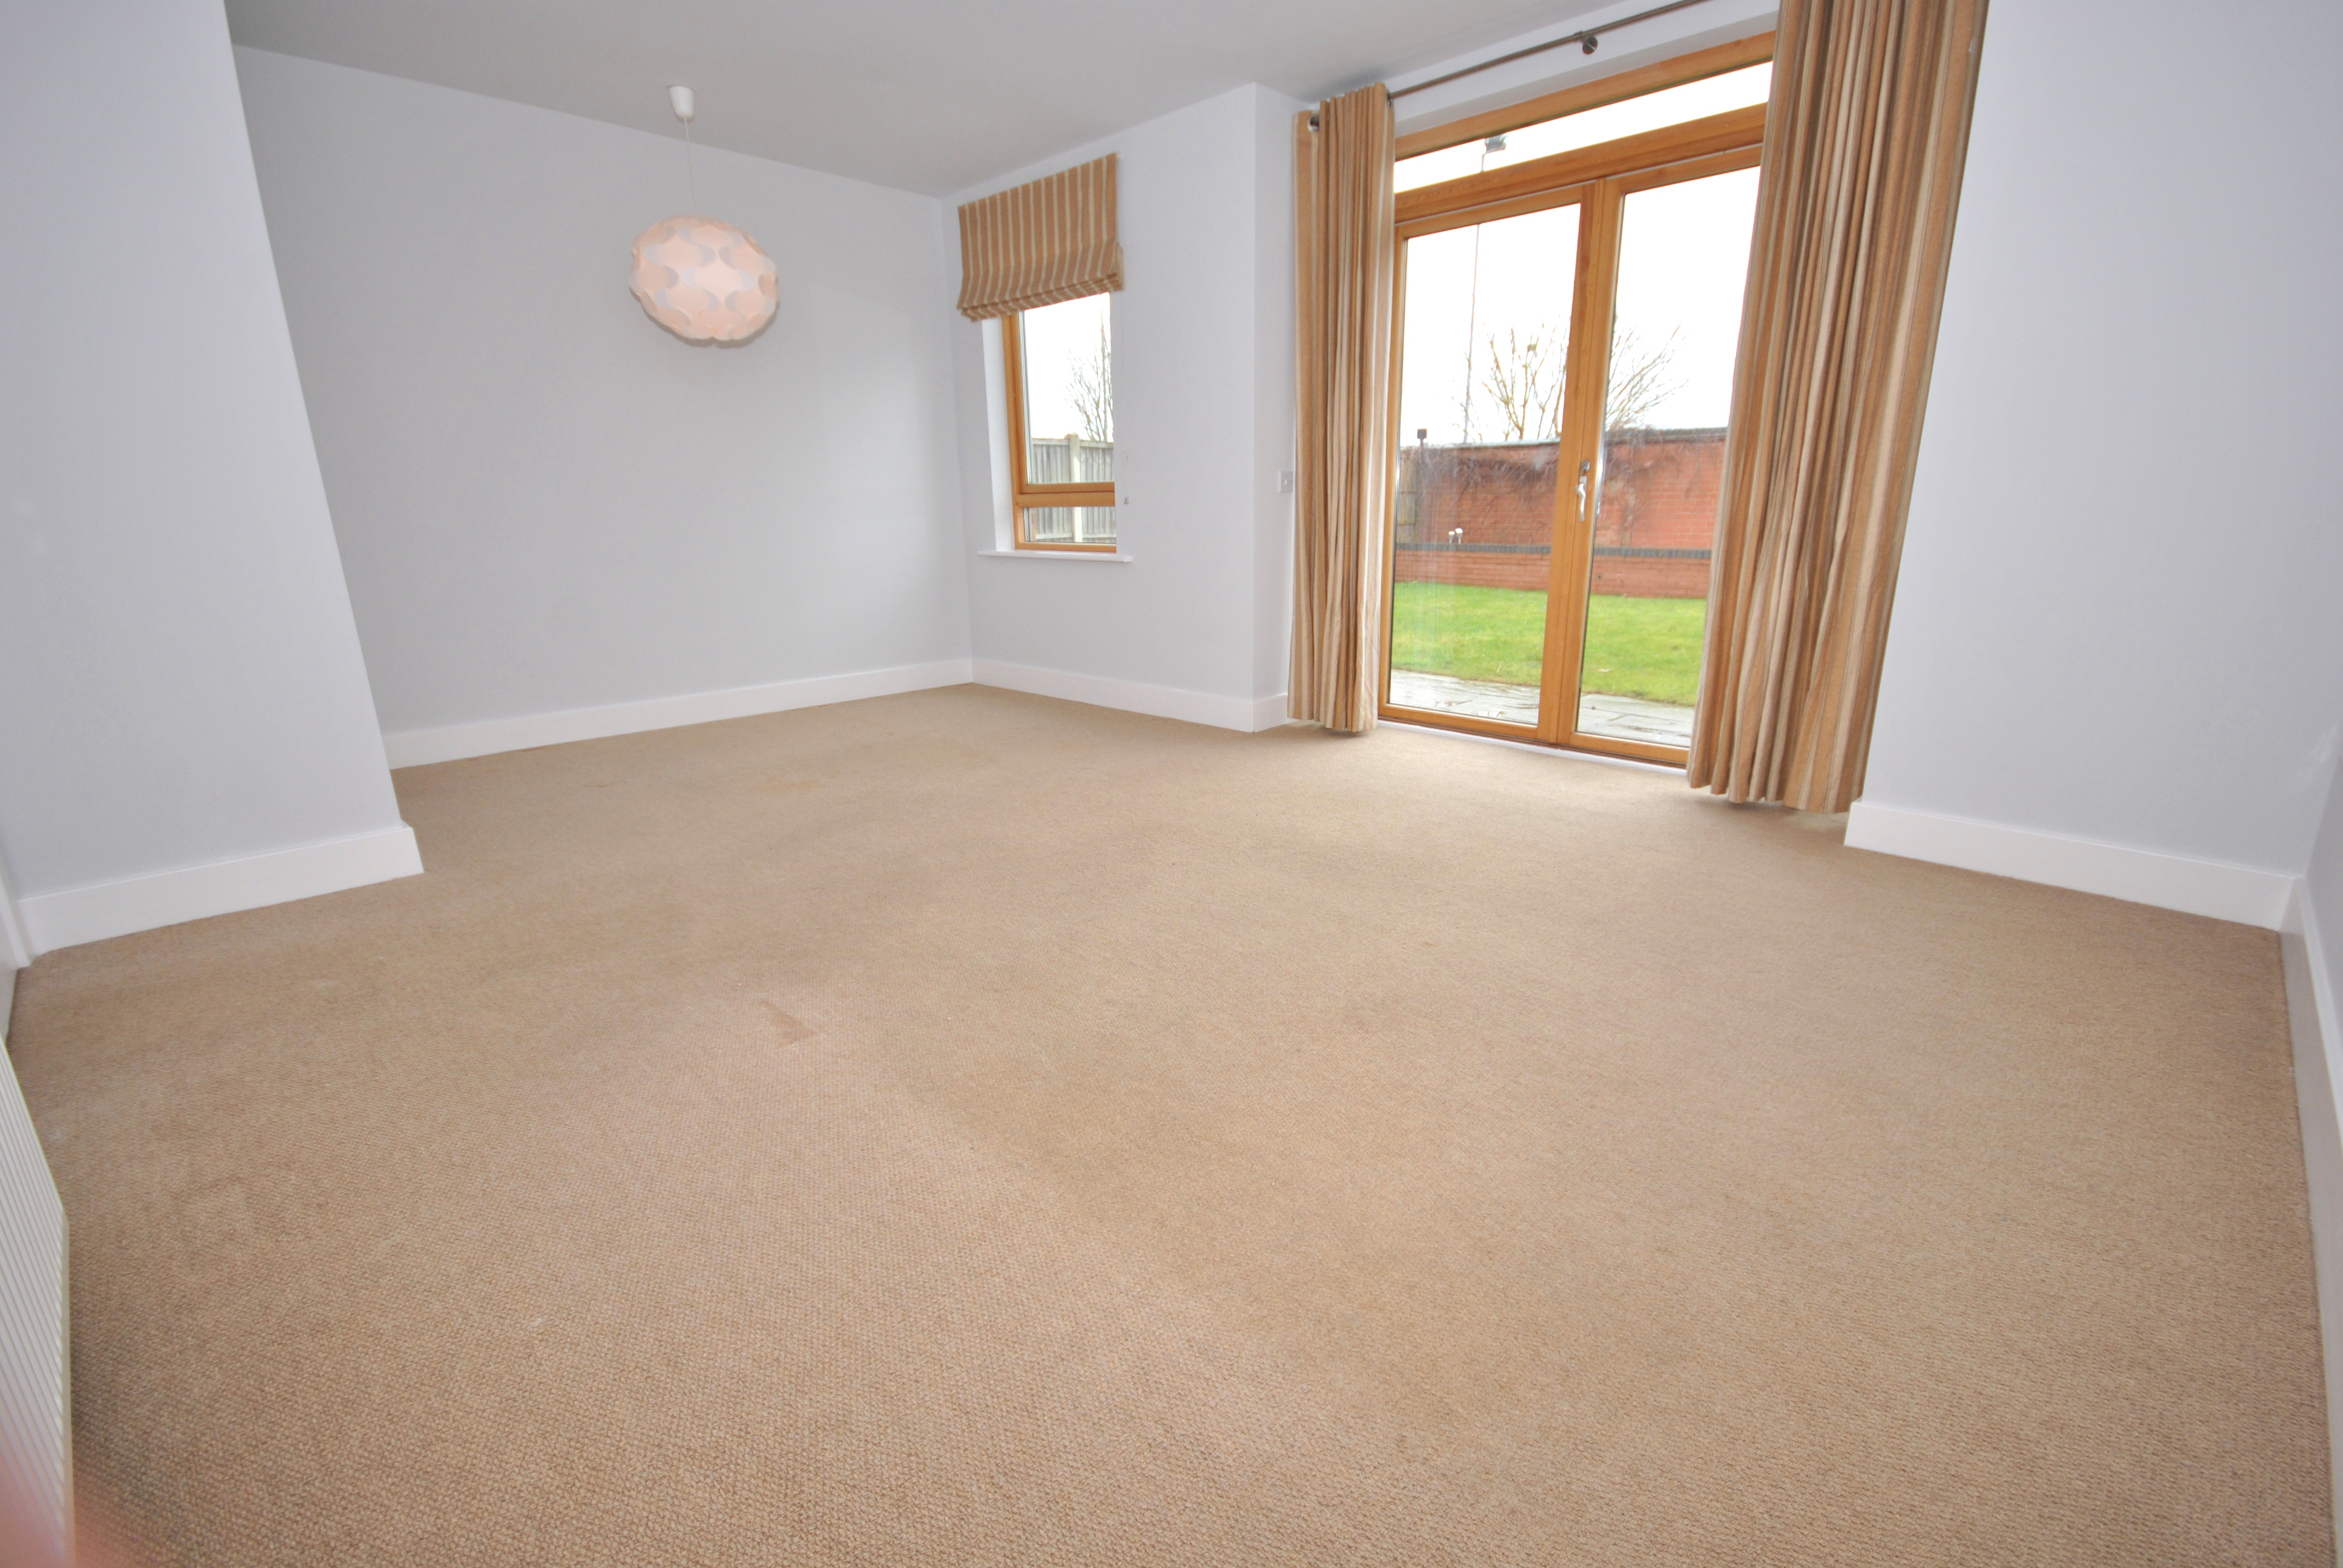 4 bed house to rent in Bingham Road, Radcliffe on Trent  - Property Image 4